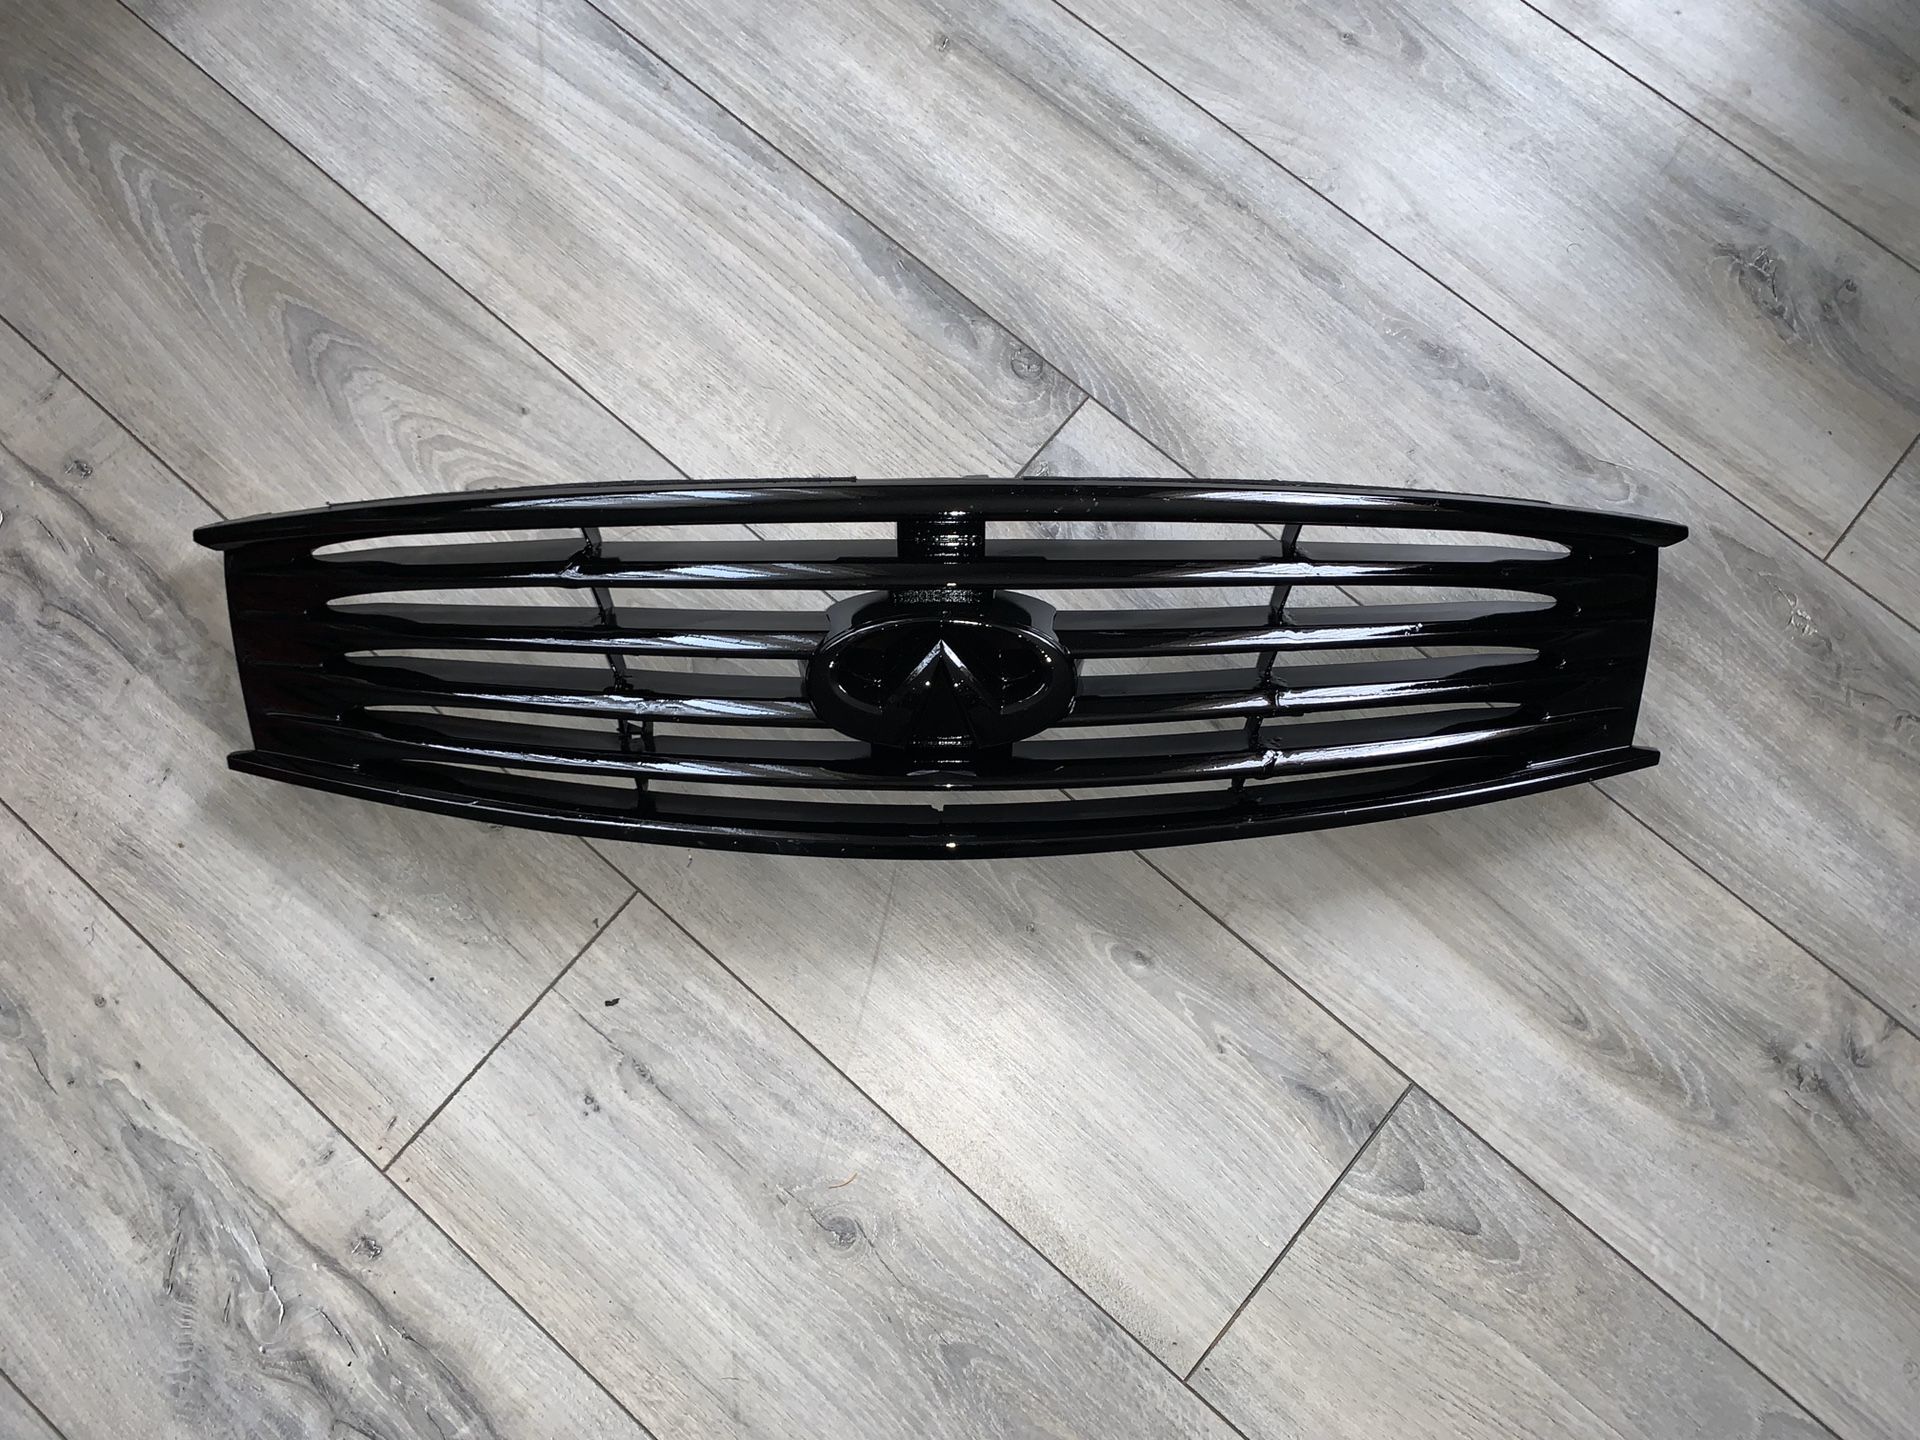 Oem Infiniti G37 q60 coupe grille